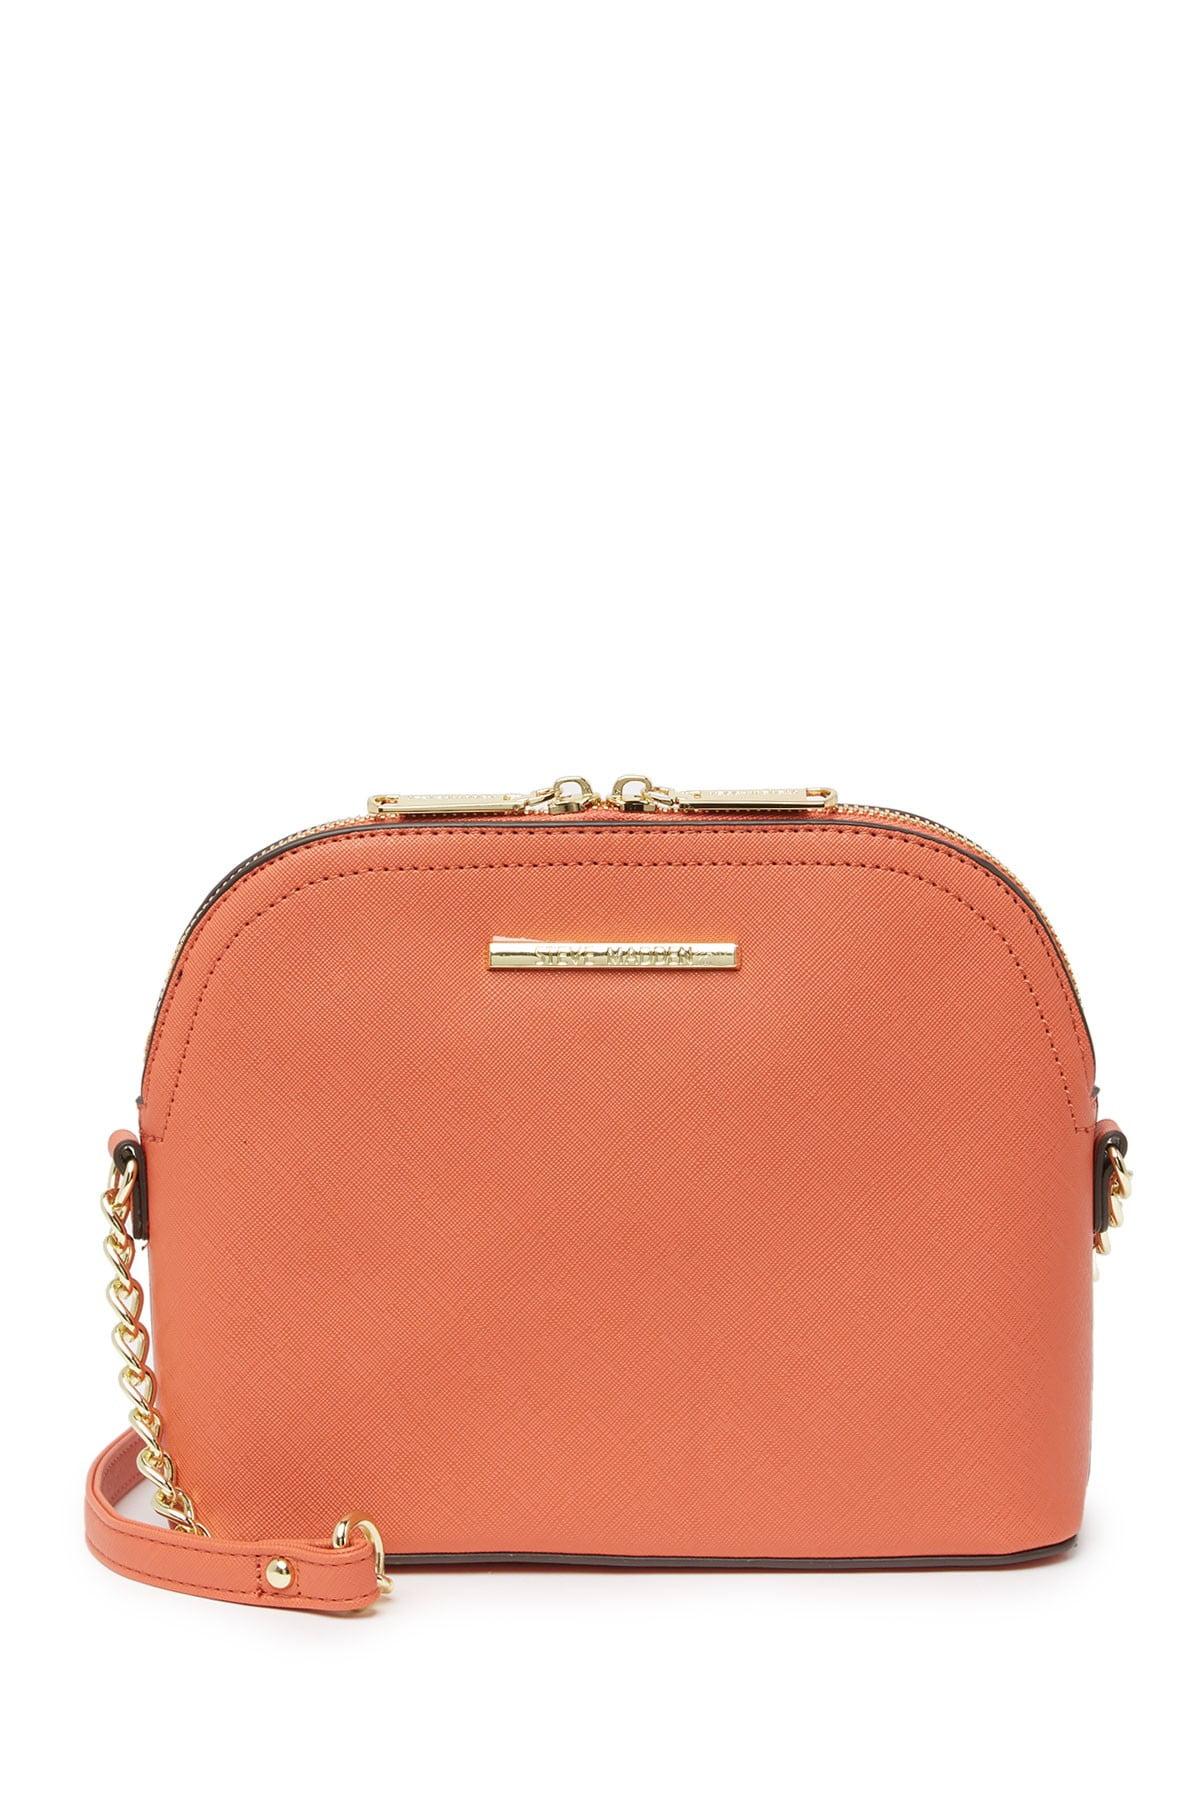 Steve Madden Bmaggie Faux Leather Dome Crossbody Bag | Lyst